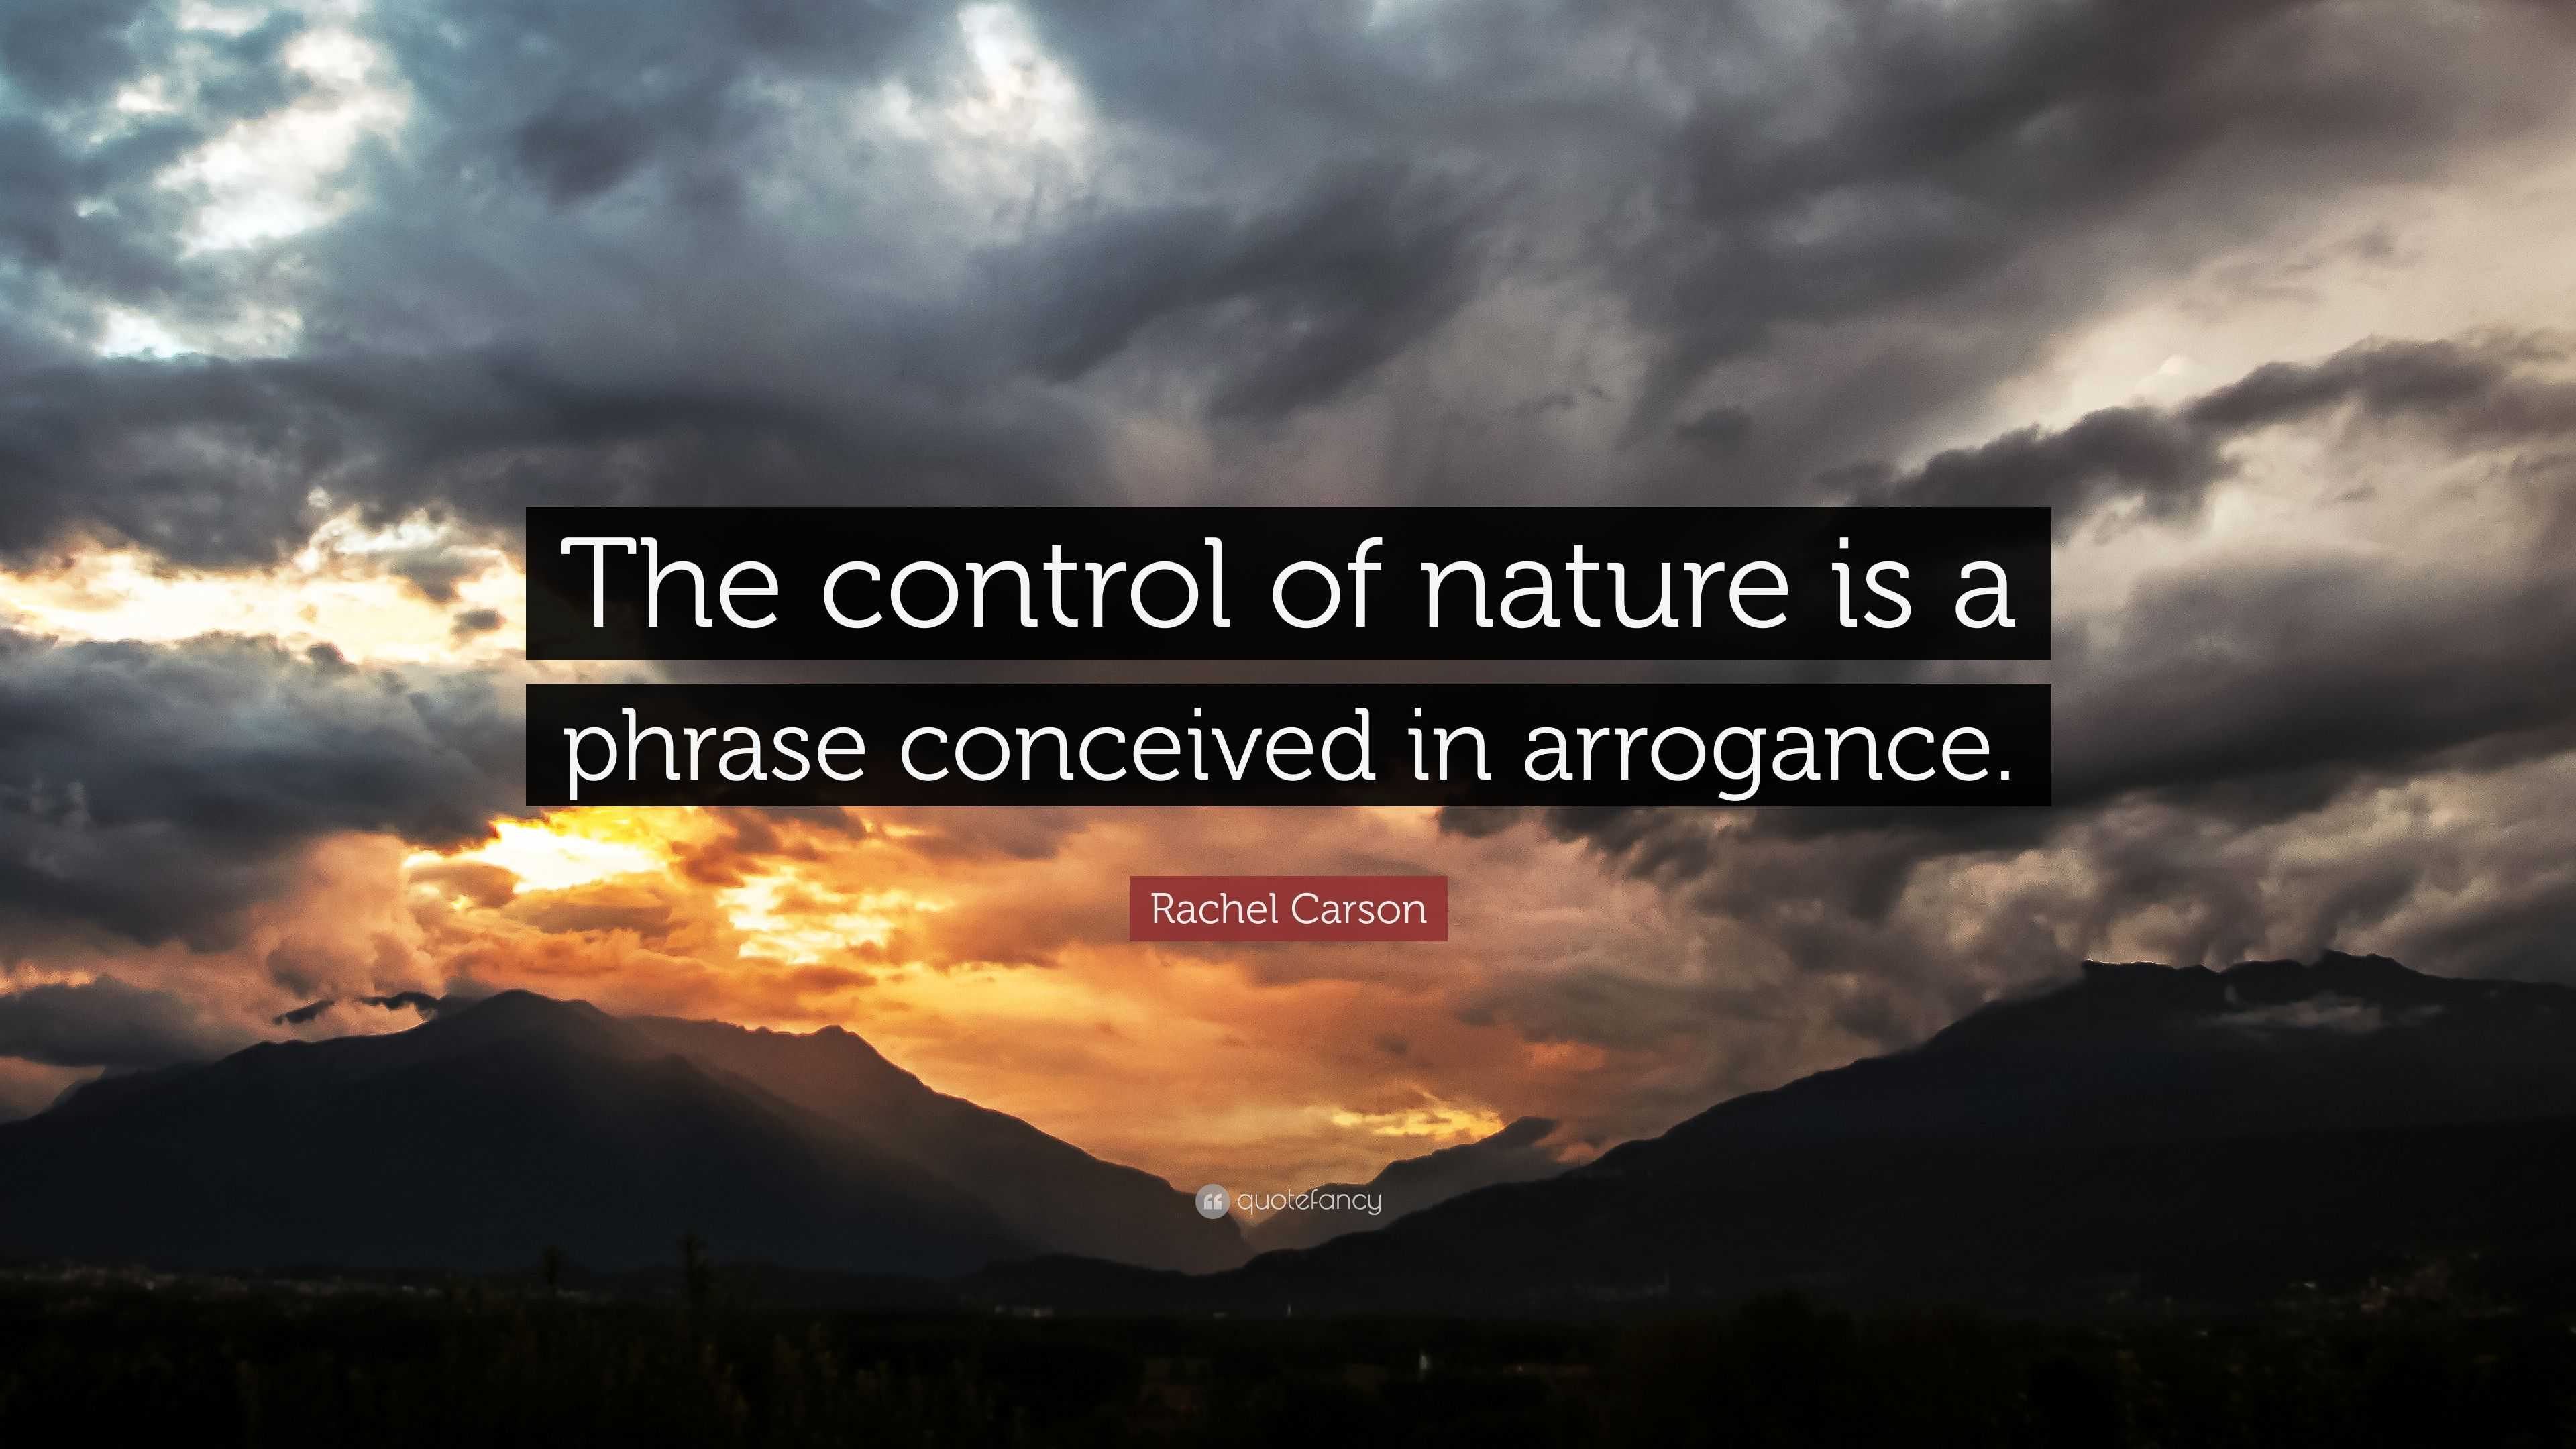 Rachel Carson “The control of nature is conceived arrogance.”